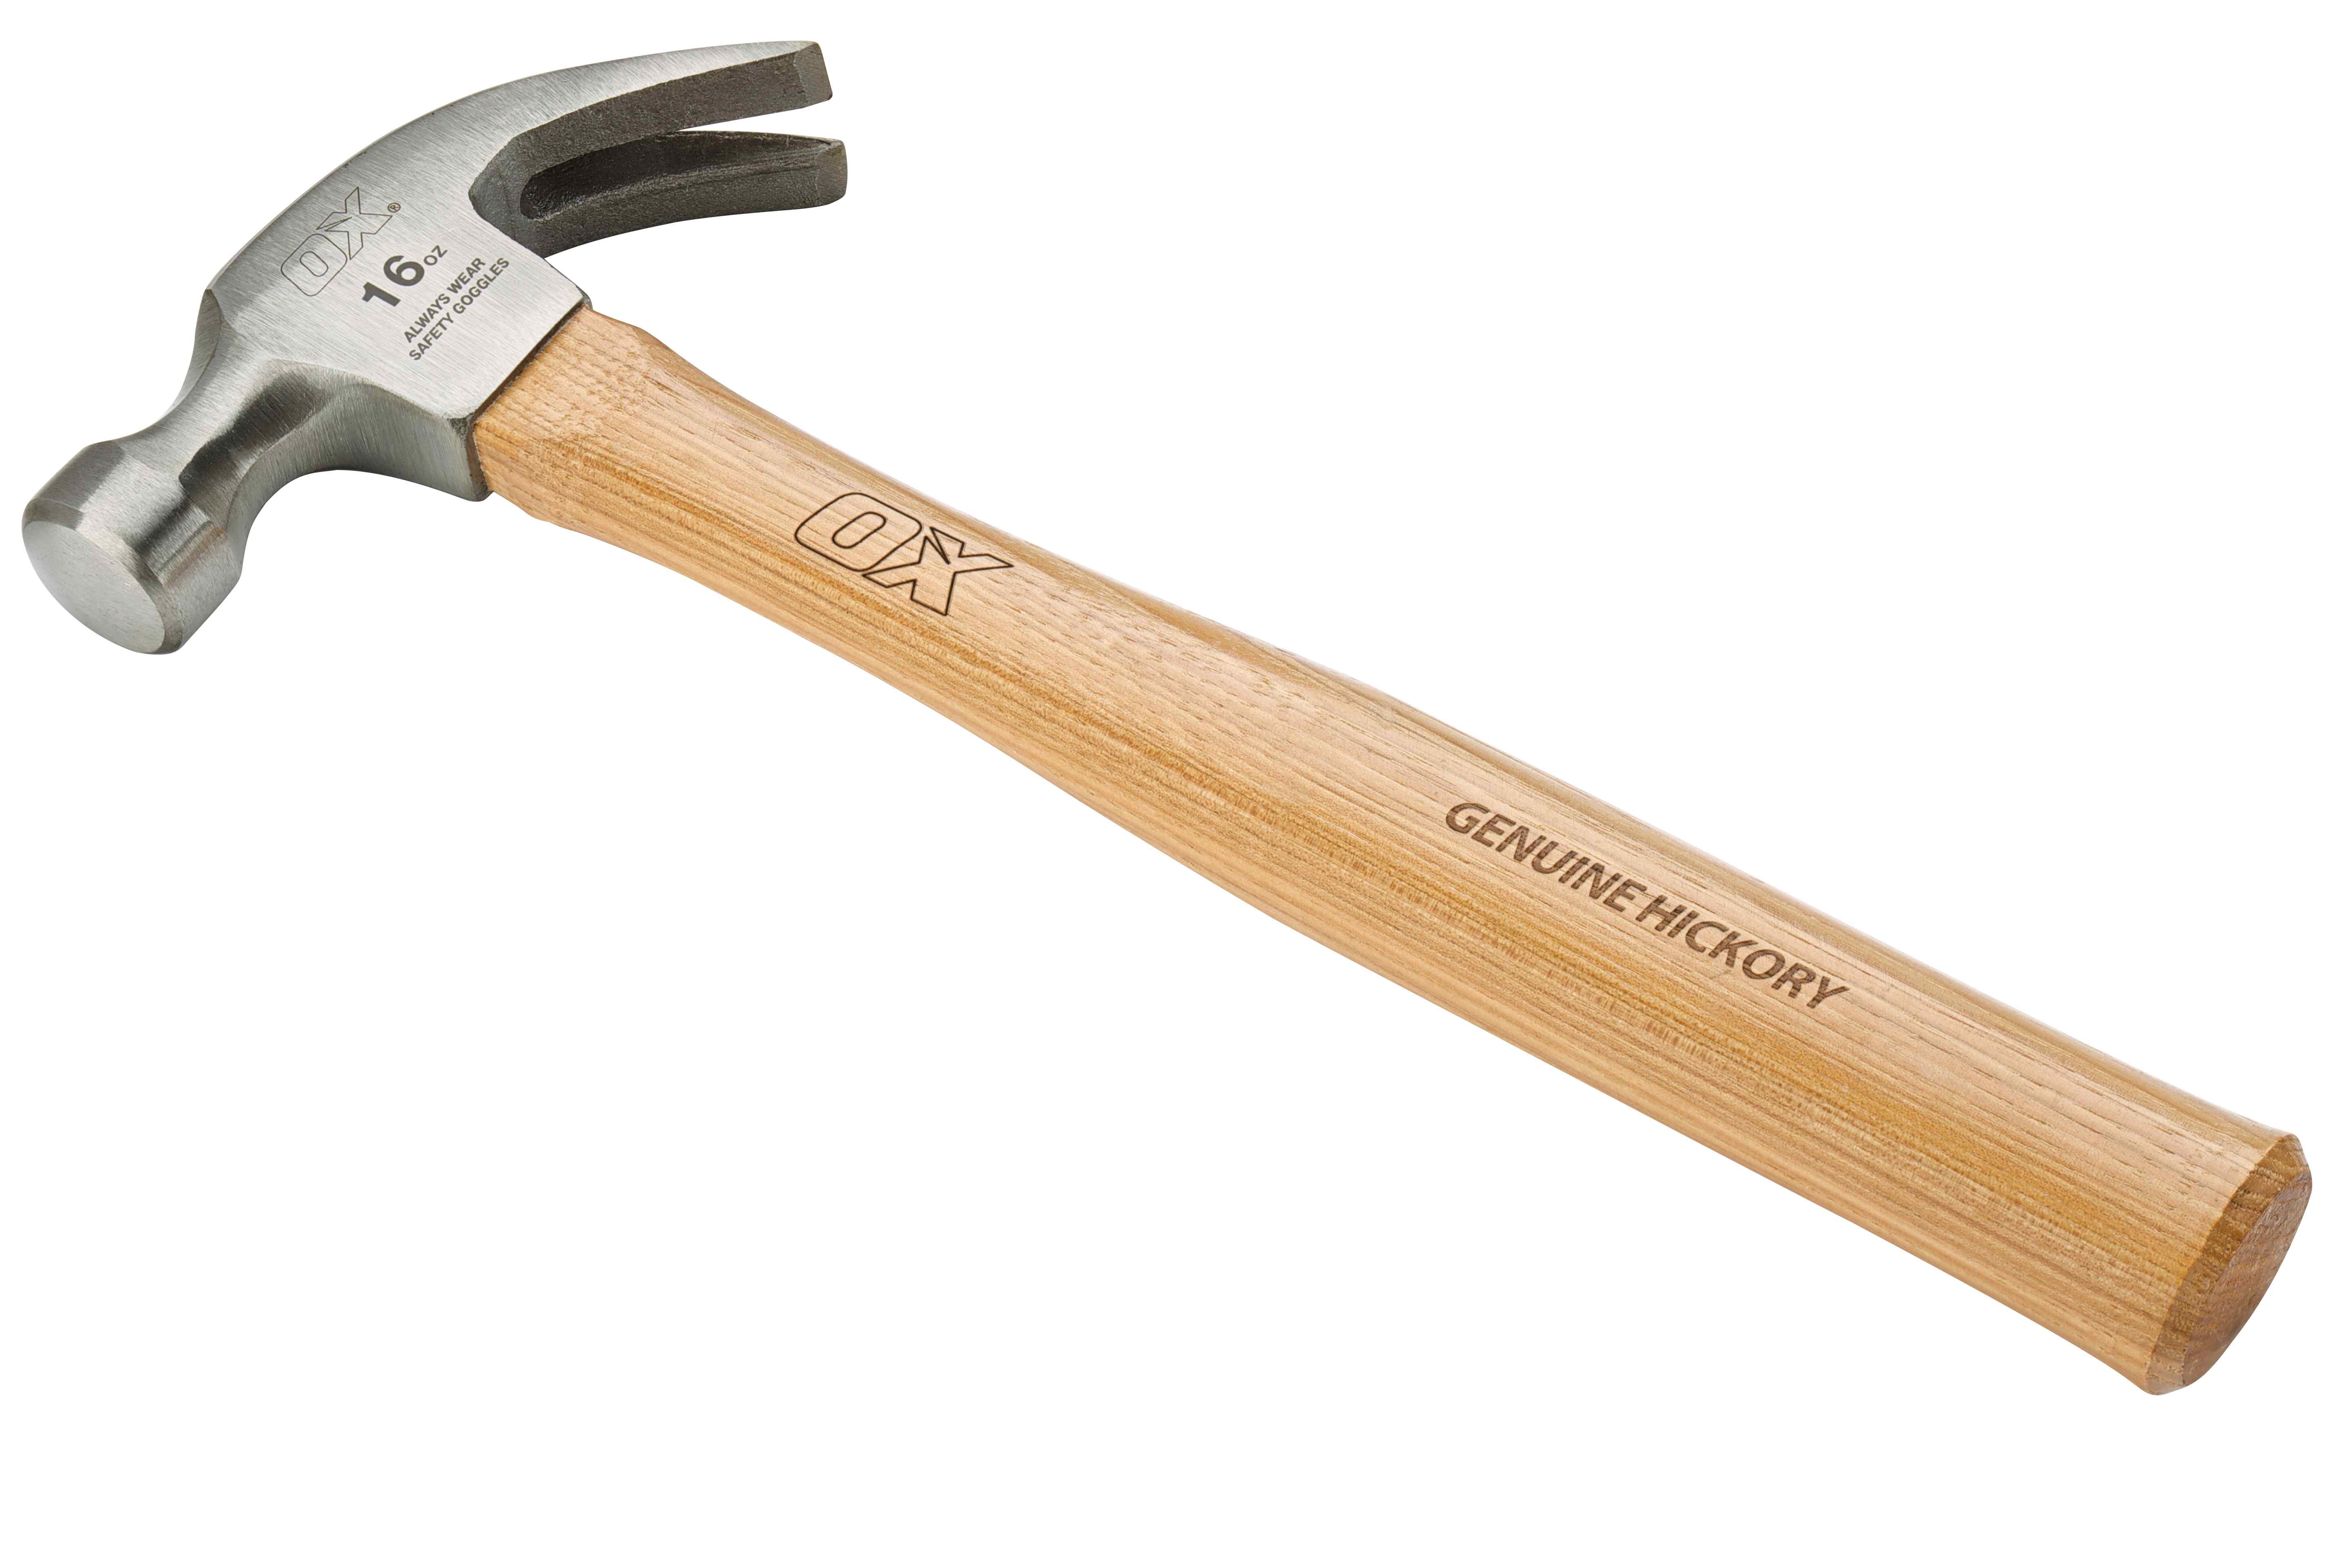 OX Trade Hickory Handle Claw Hammer - 16 oz